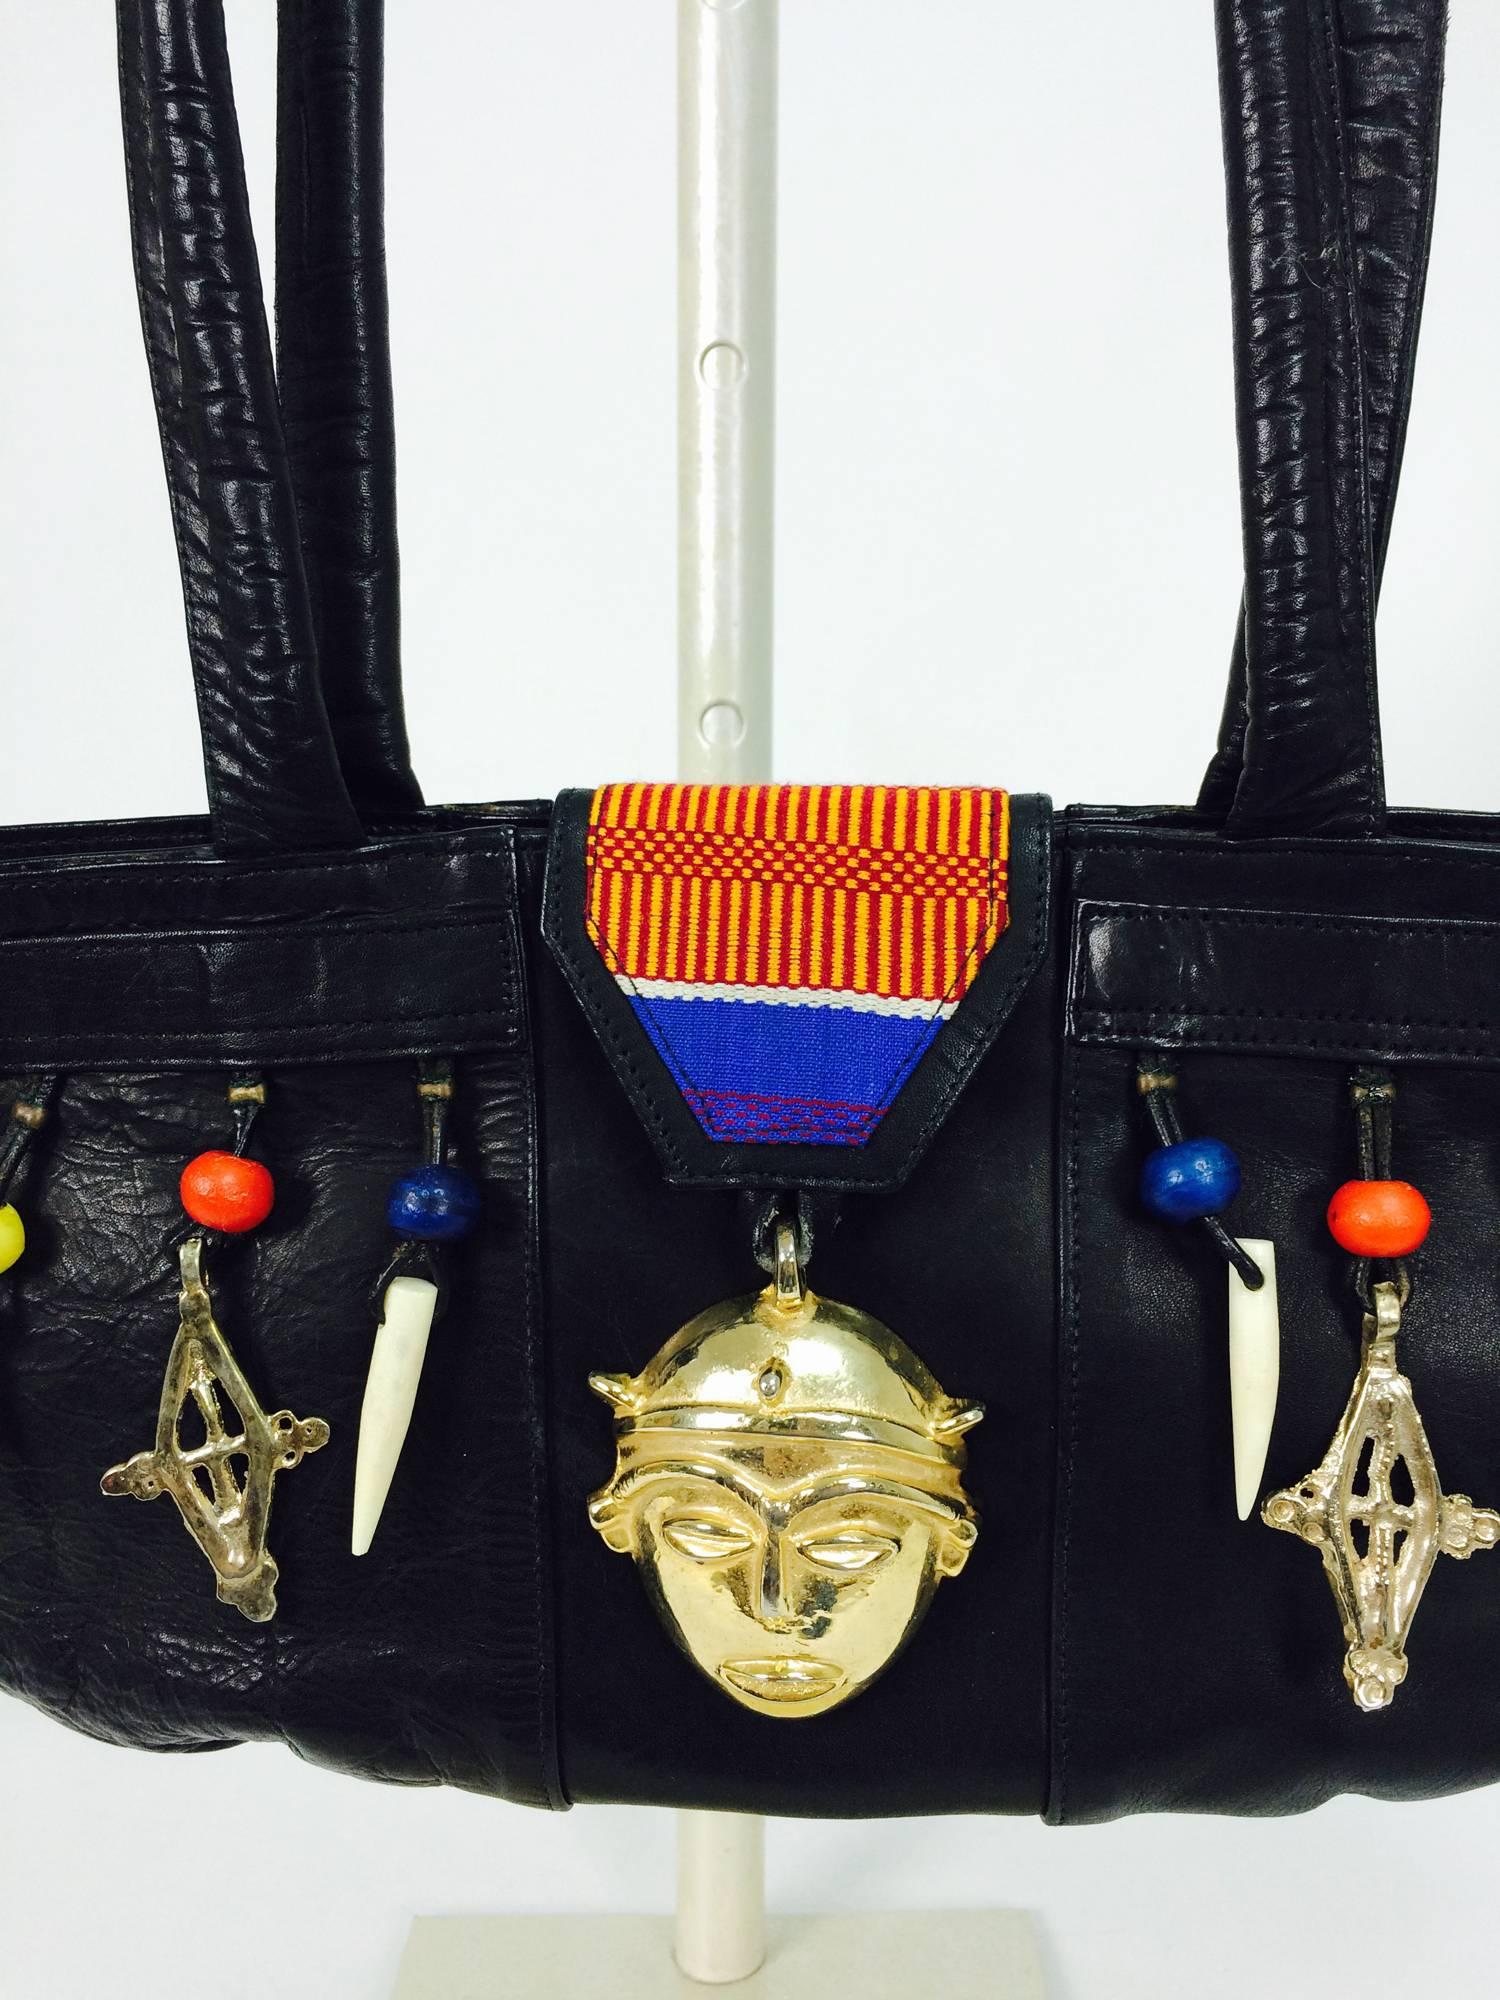 Novelty black leather tribal charm unique shape handbag...Black leather shoulder handbag with an exaggerated shape bag & shoulder straps...The front of the bag is decorated with gold metal charms, wooden beads and bone tusks...A coloured woven